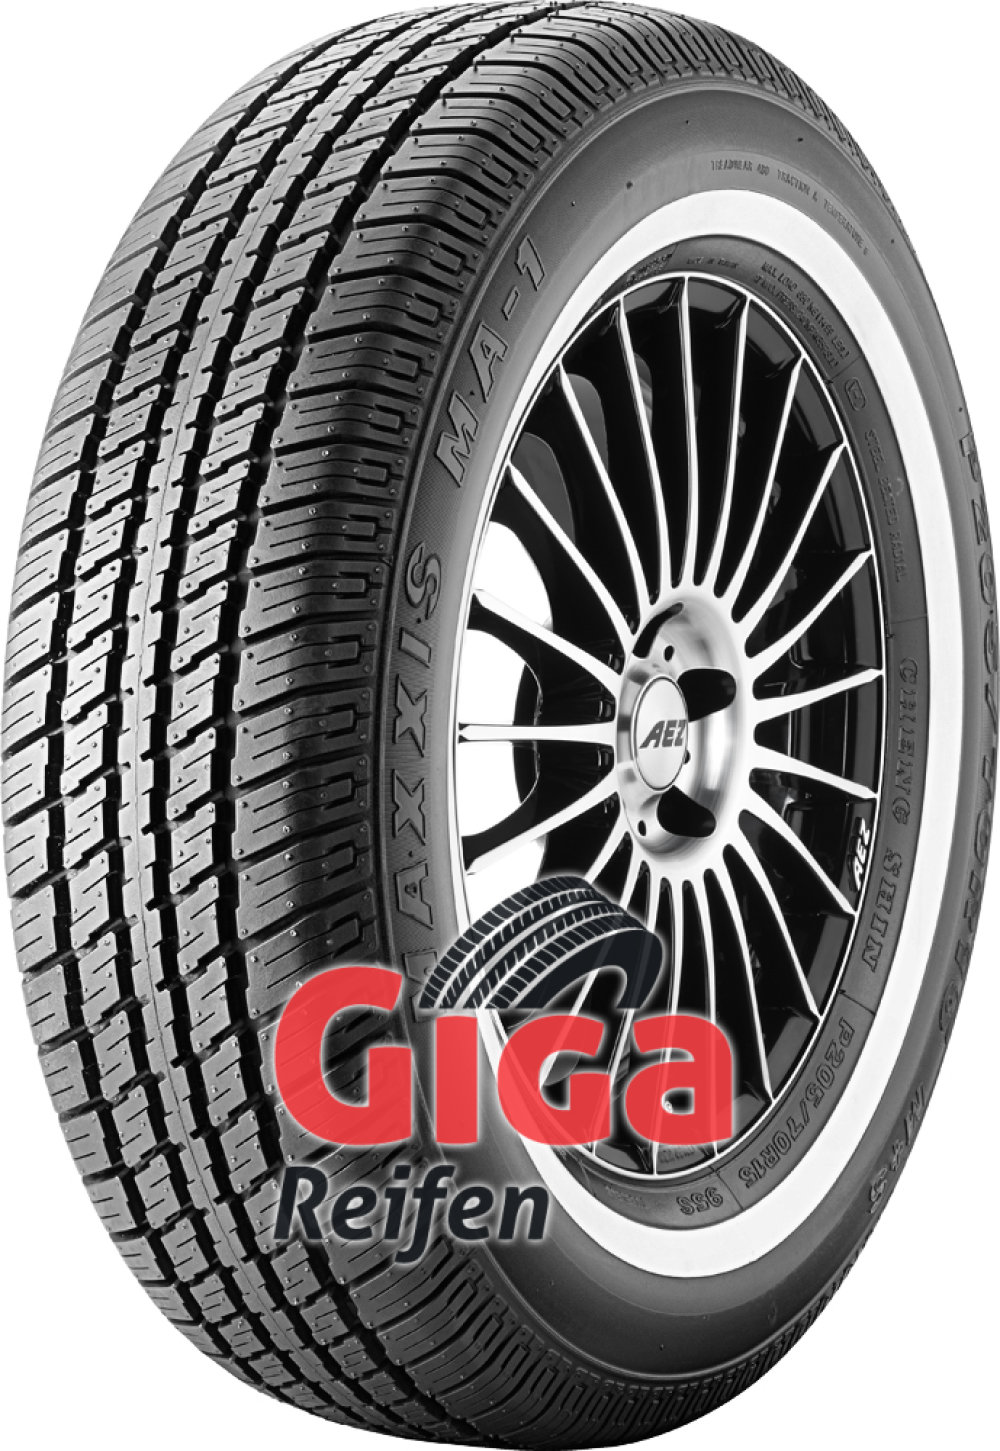 Maxxis MA 1 ( 185/75 R14 89S WSW 20mm ) von Maxxis